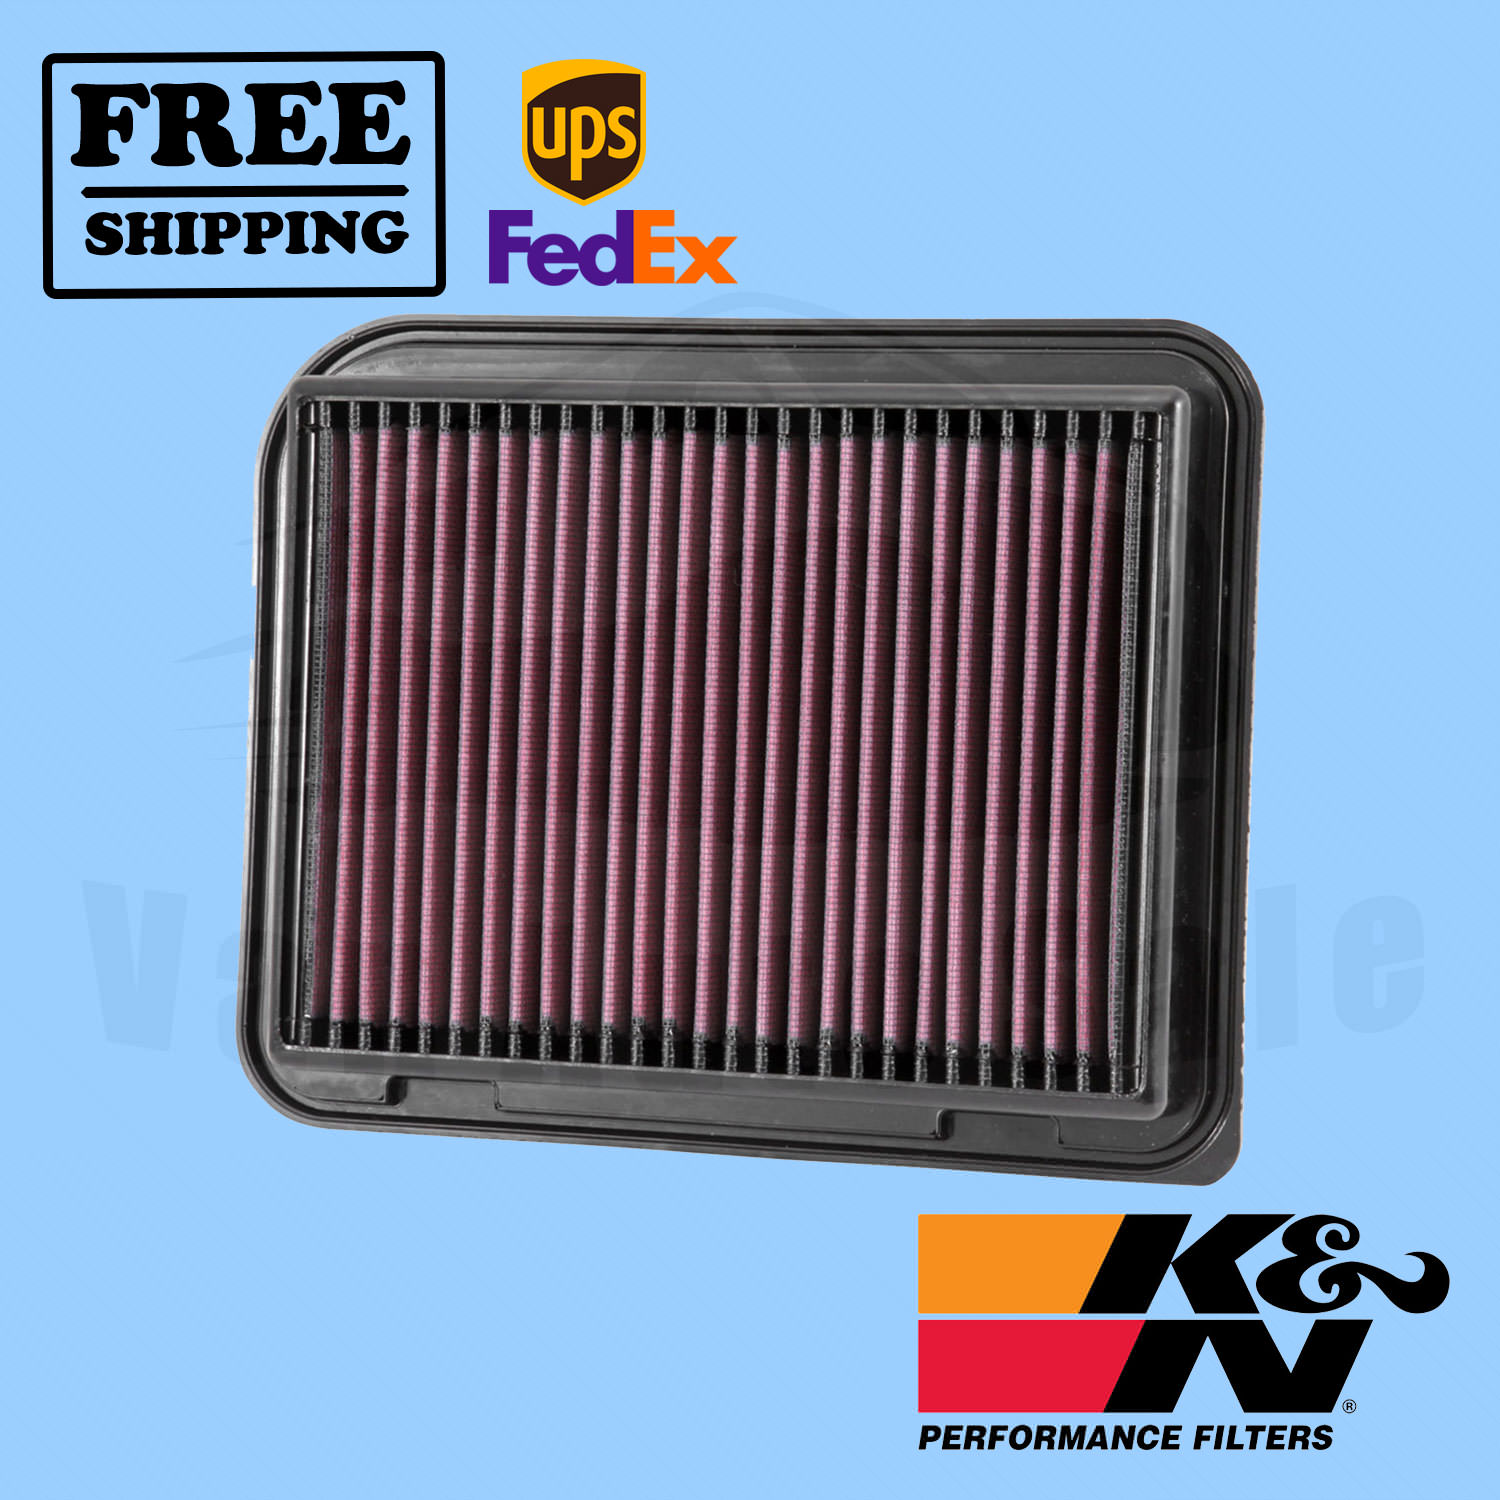 Replacement Air Filter K&N for Mitsubishi Outlander Sport 2012-2020 | eBay 2015 Mitsubishi Outlander Sport Air Filter Replacement